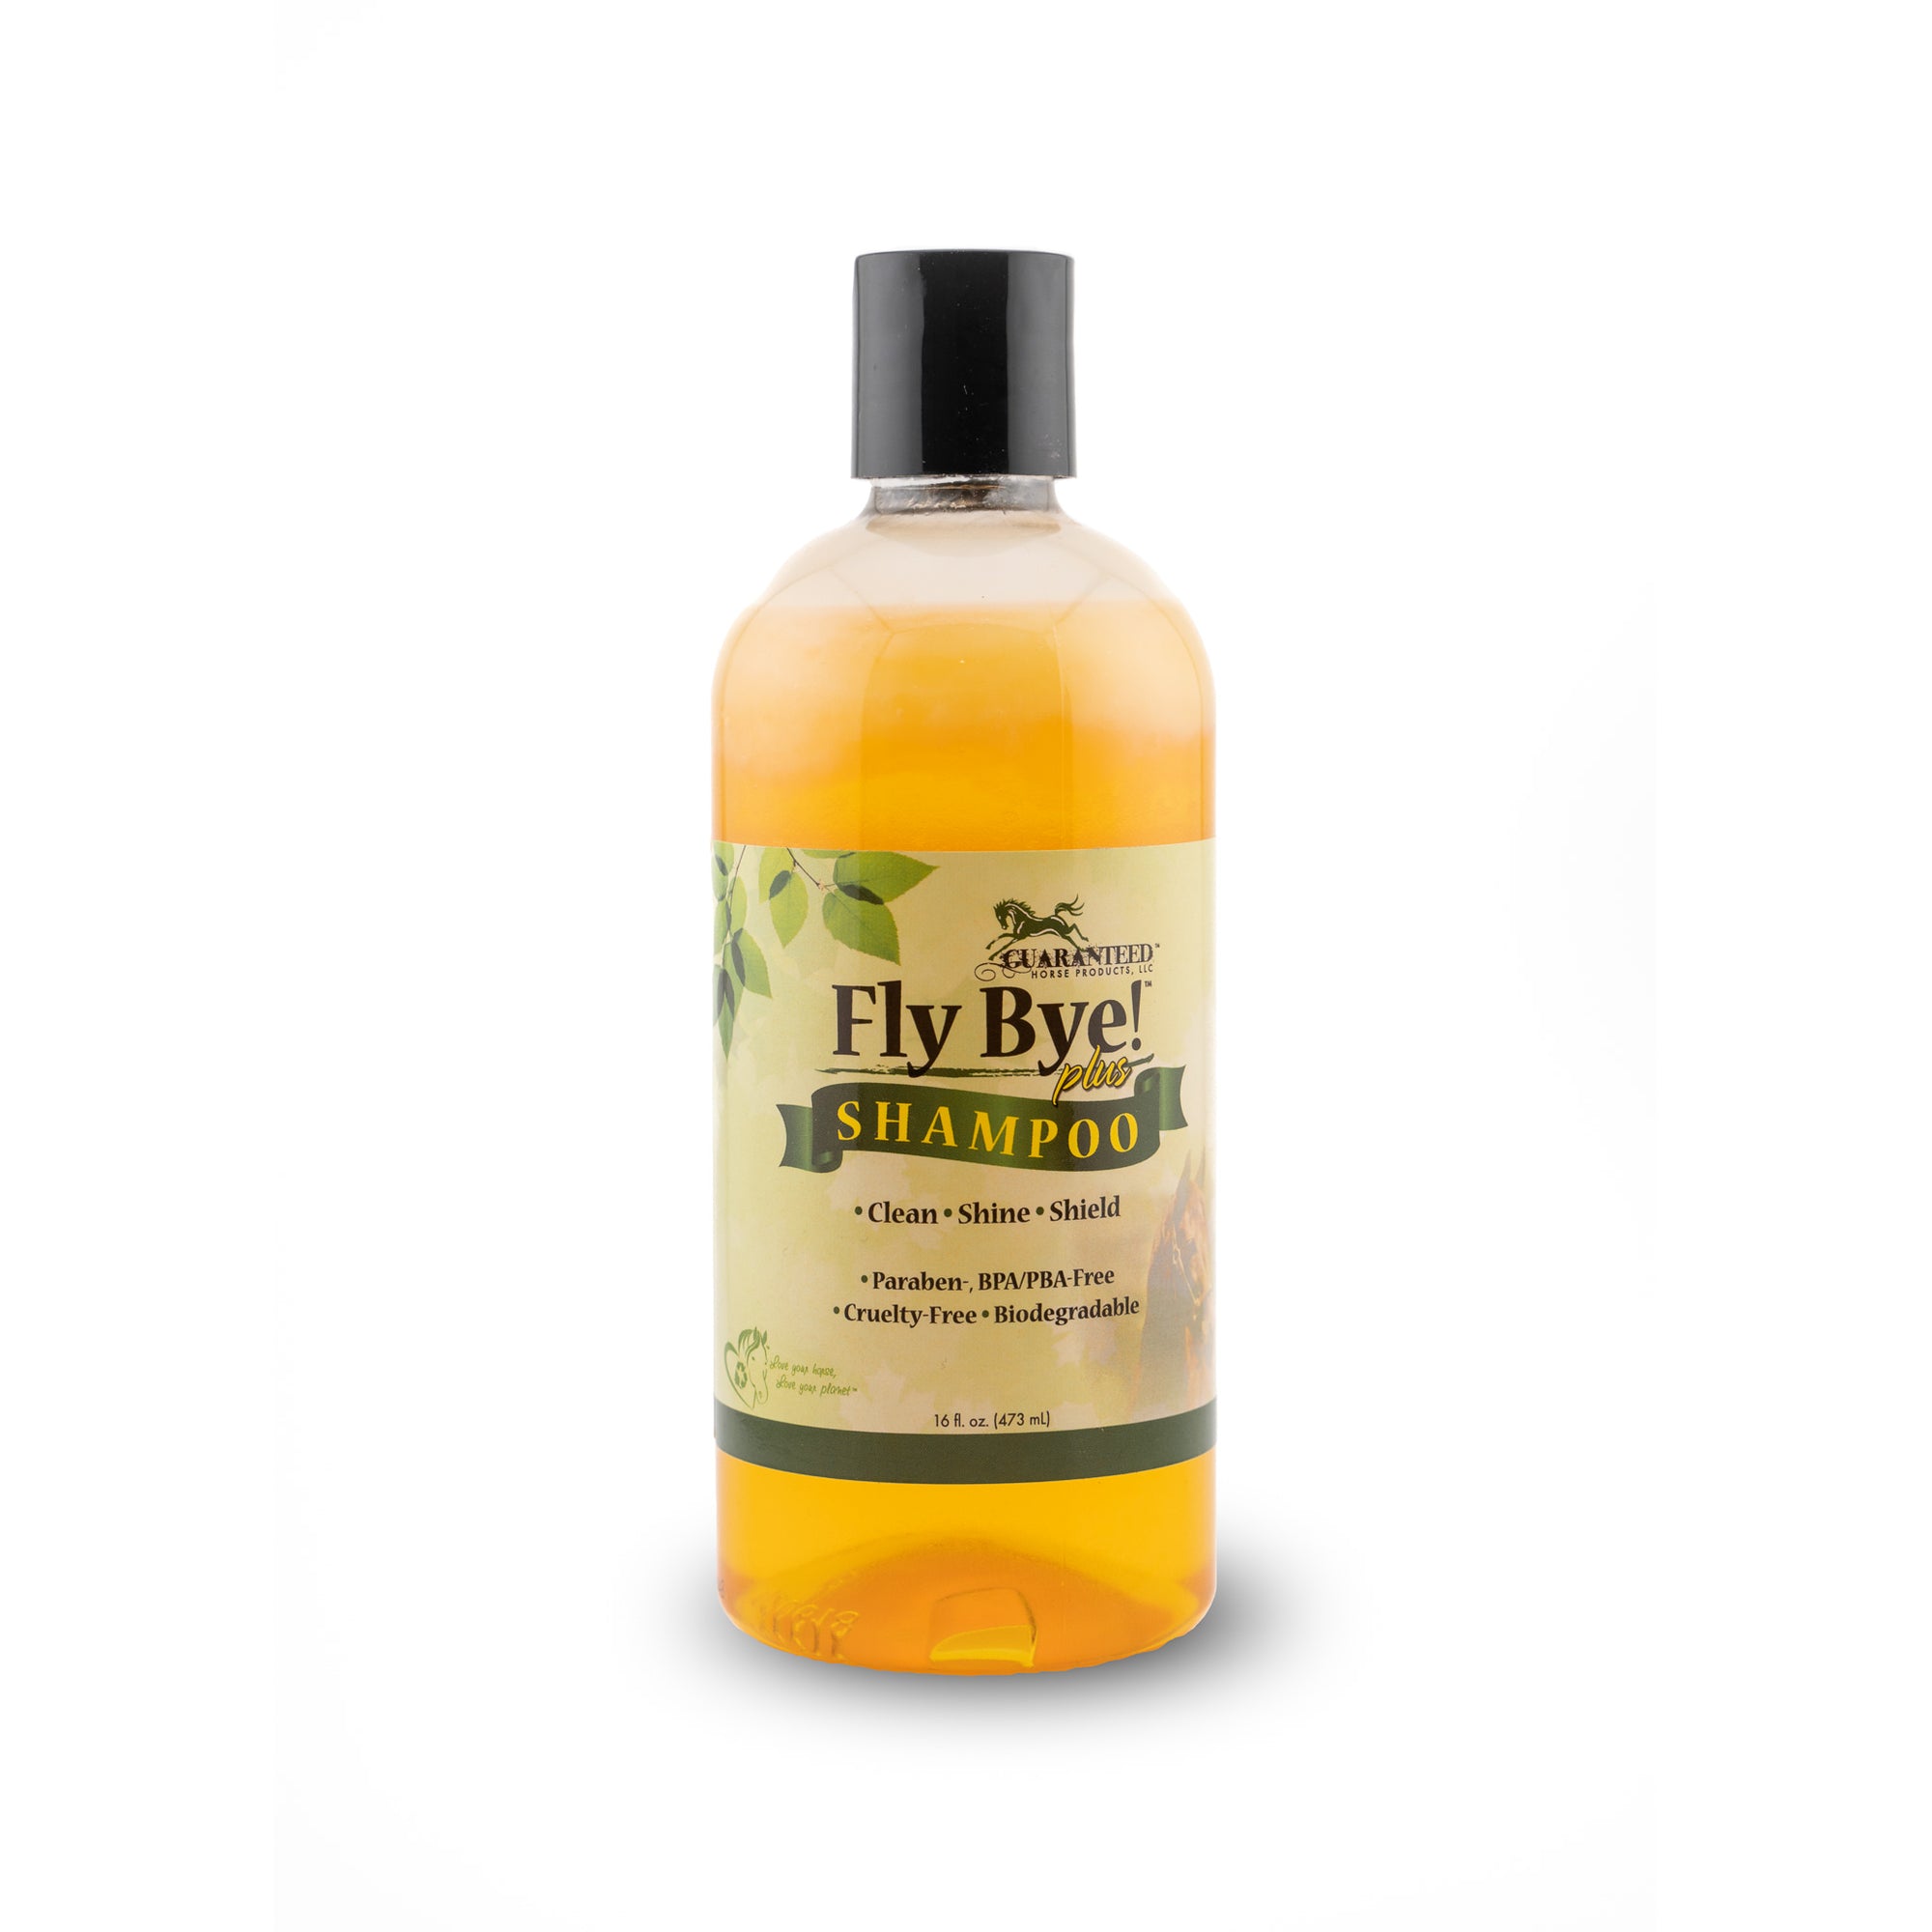 Fly Bye! Plus shampoo for horses and other animals infused with fly control, 16 oz bottle